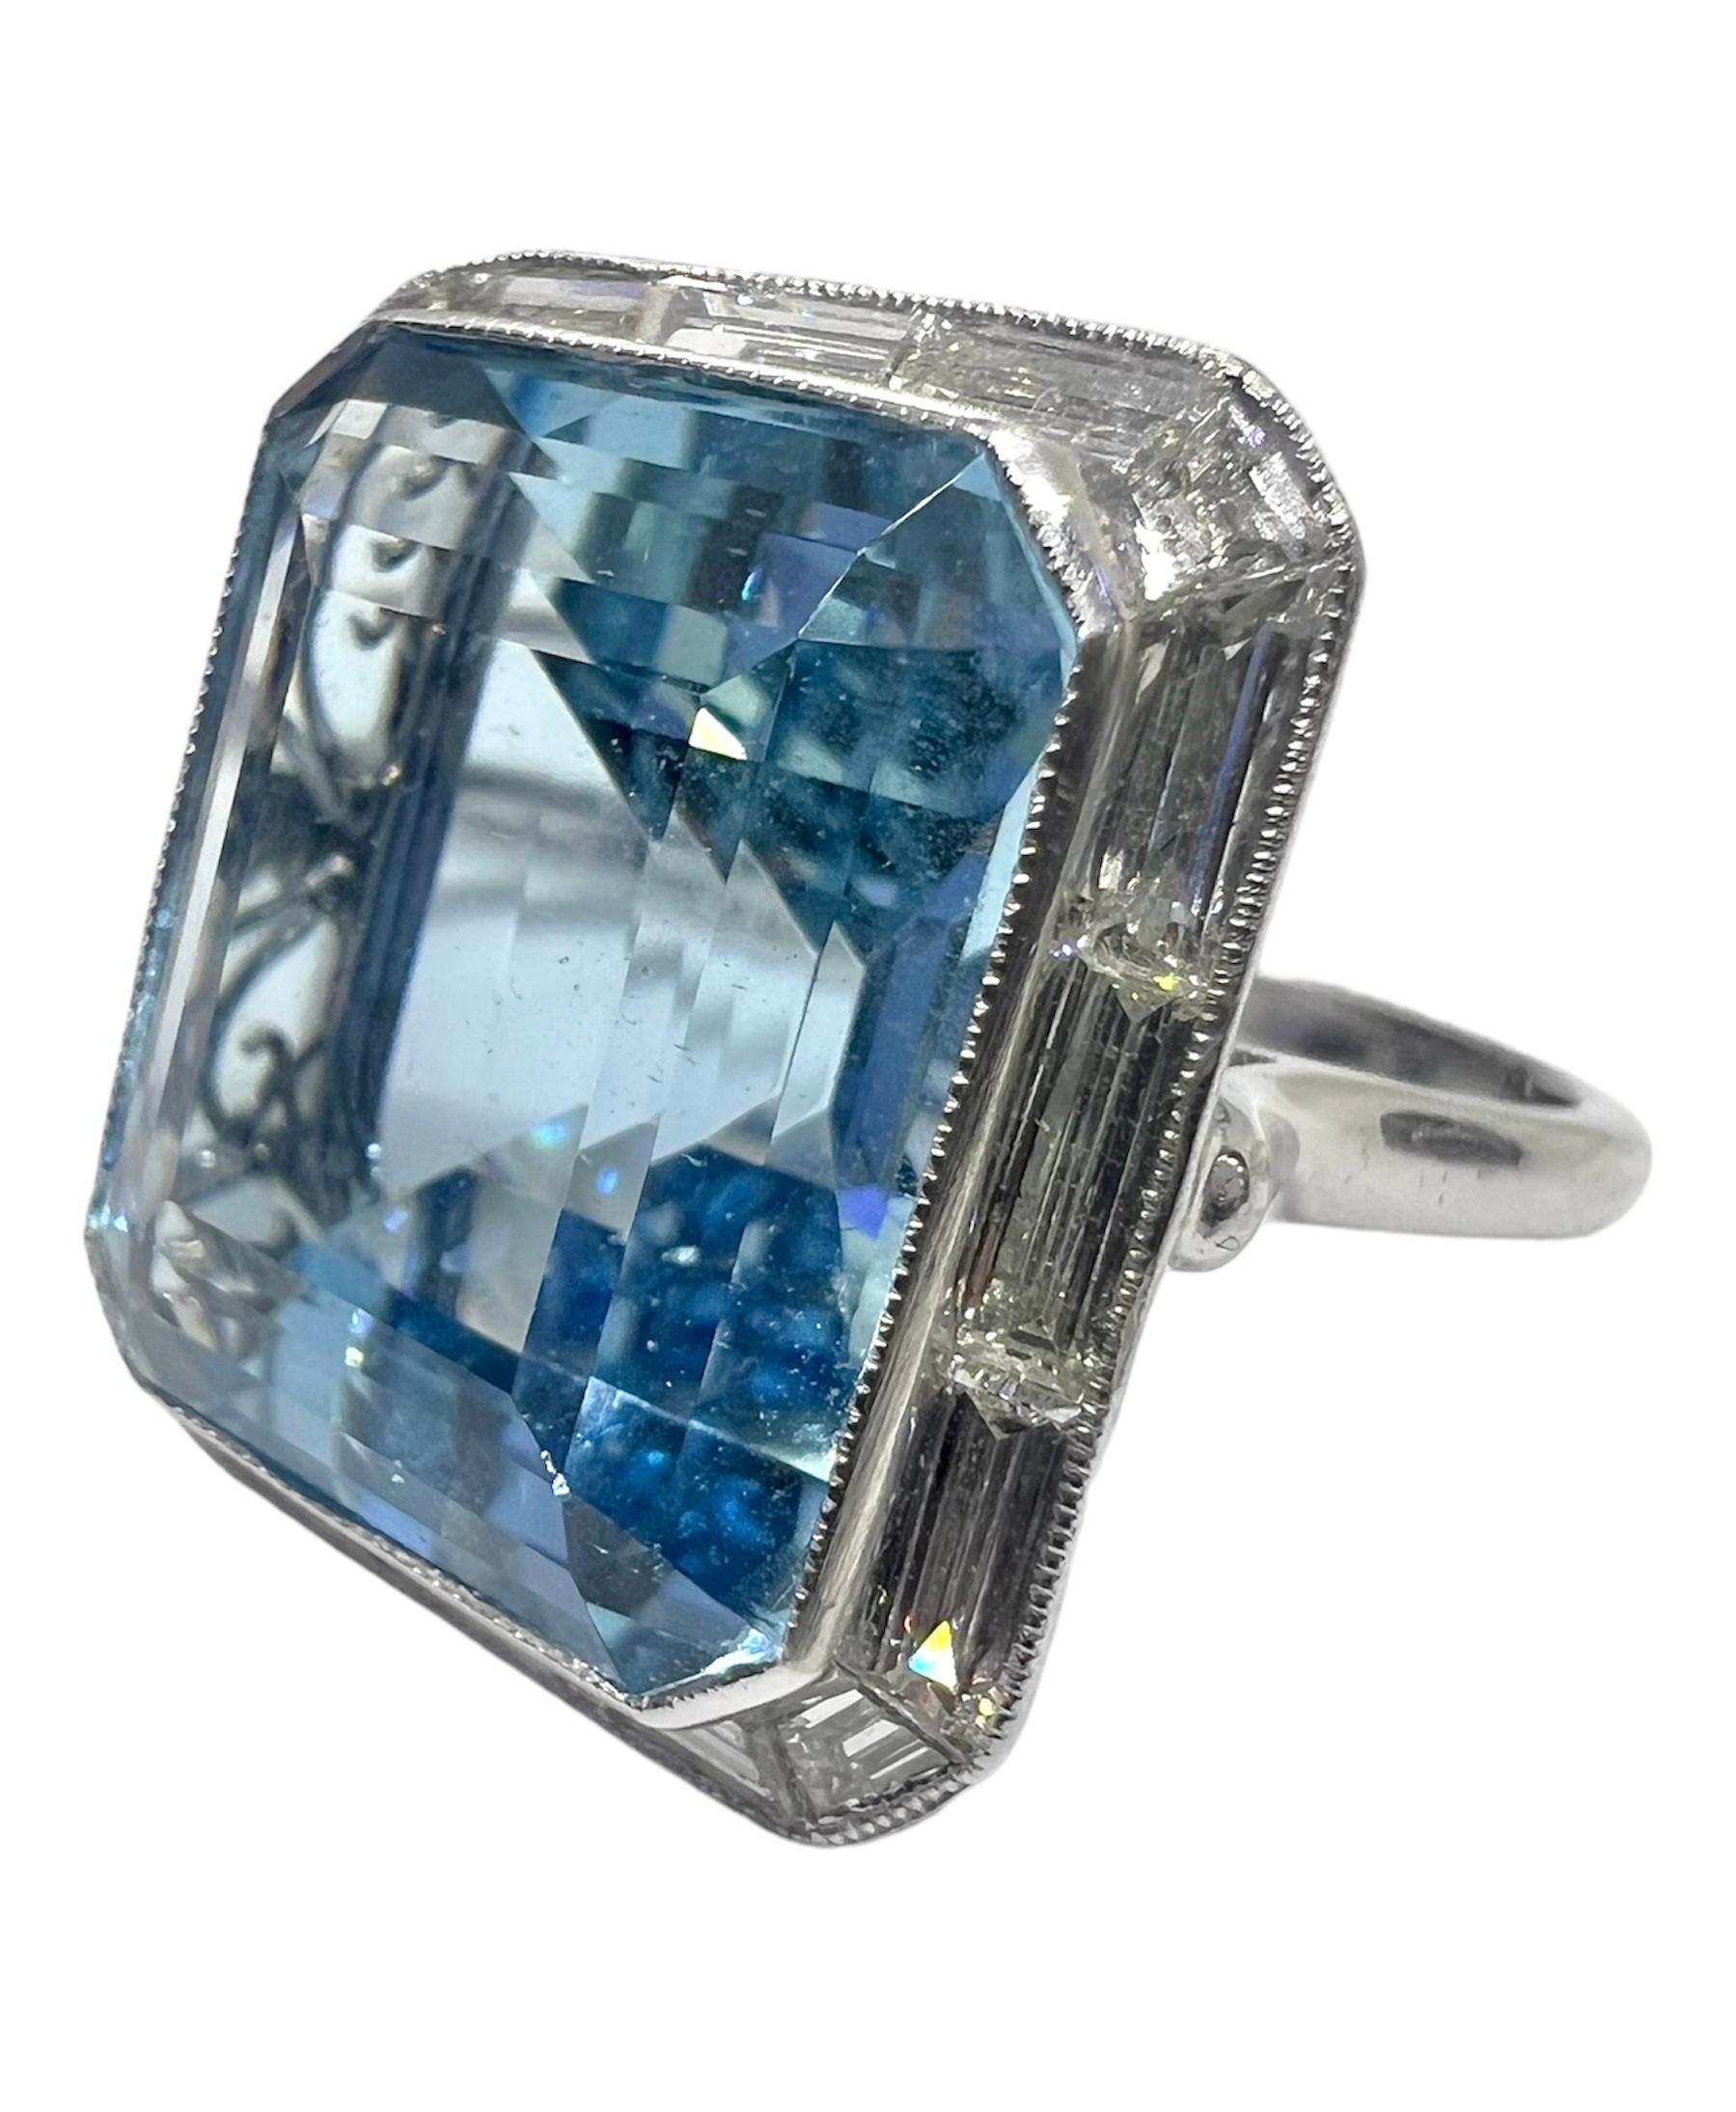 Platinum ring with 16.25 carat aquamarine and 1.26 carat diamond.

Sophia D by Joseph Dardashti LTD has been known worldwide for 35 years and are inspired by classic Art Deco design that merges with modern manufacturing techniques.